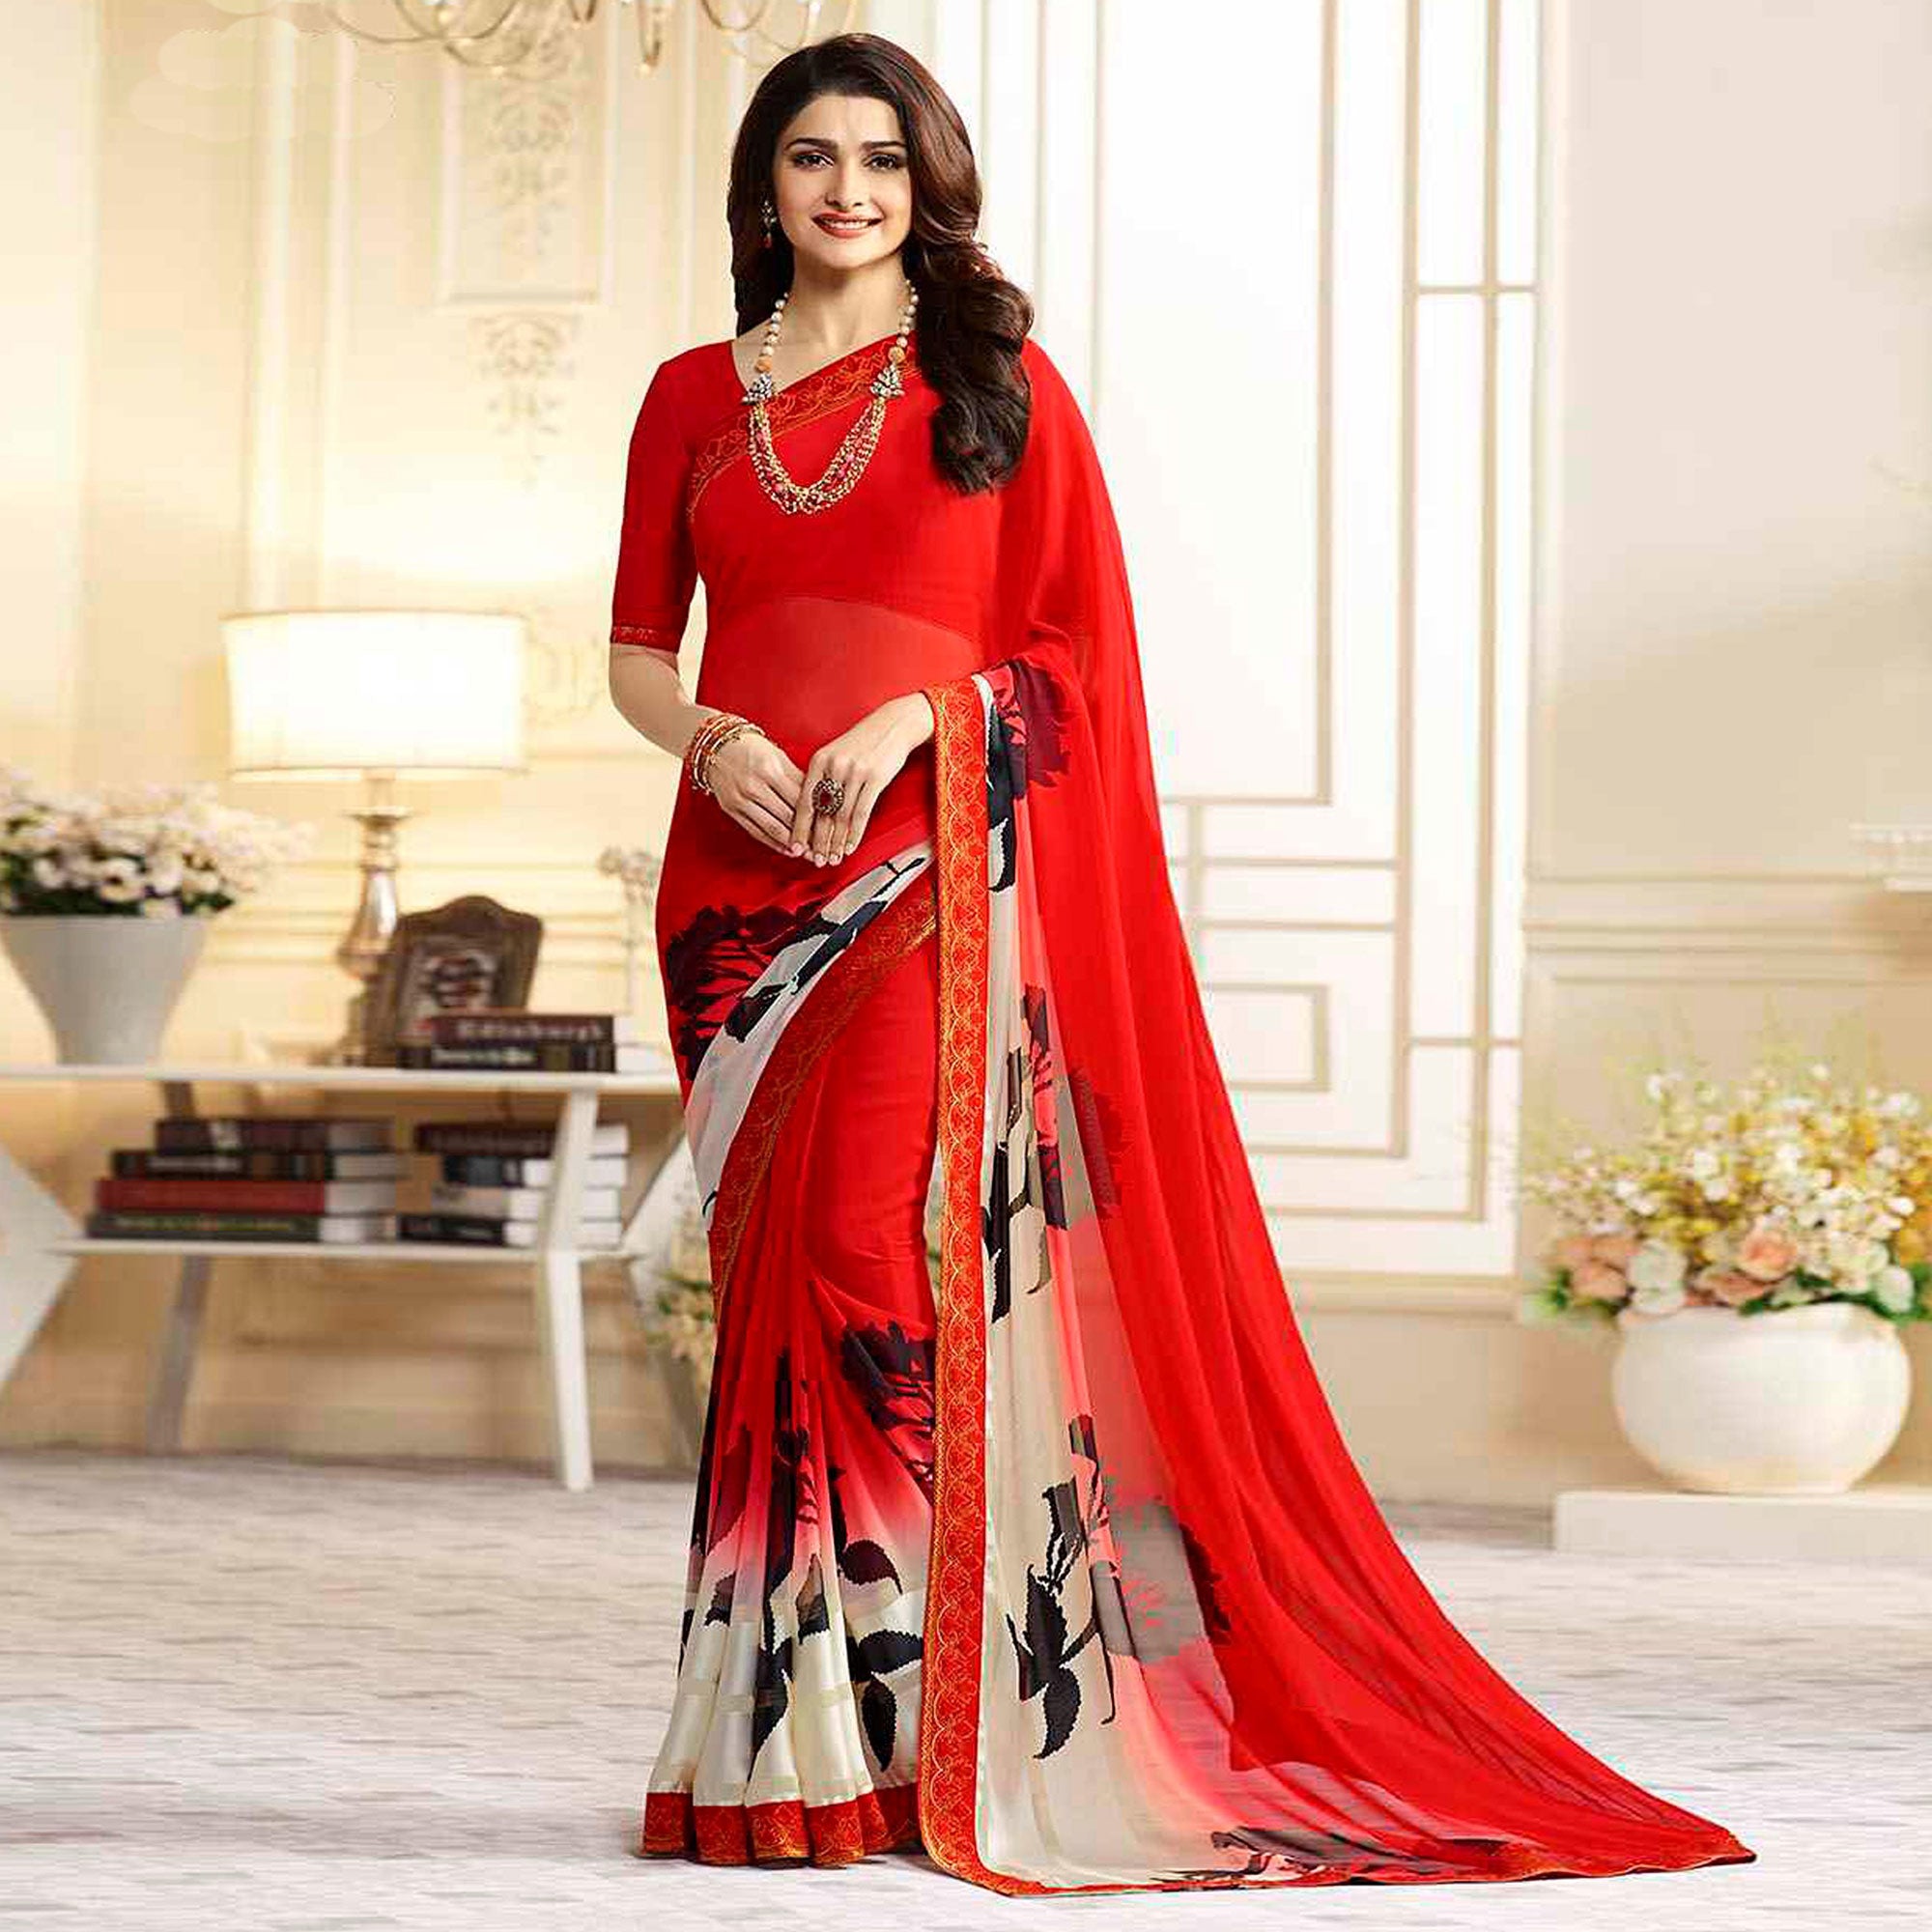 Reeta Fashion Gorgeous Red Georgette Printed saree with heavy embroidery  lace Saree with Unstitched Blouse | Reeta Fashion